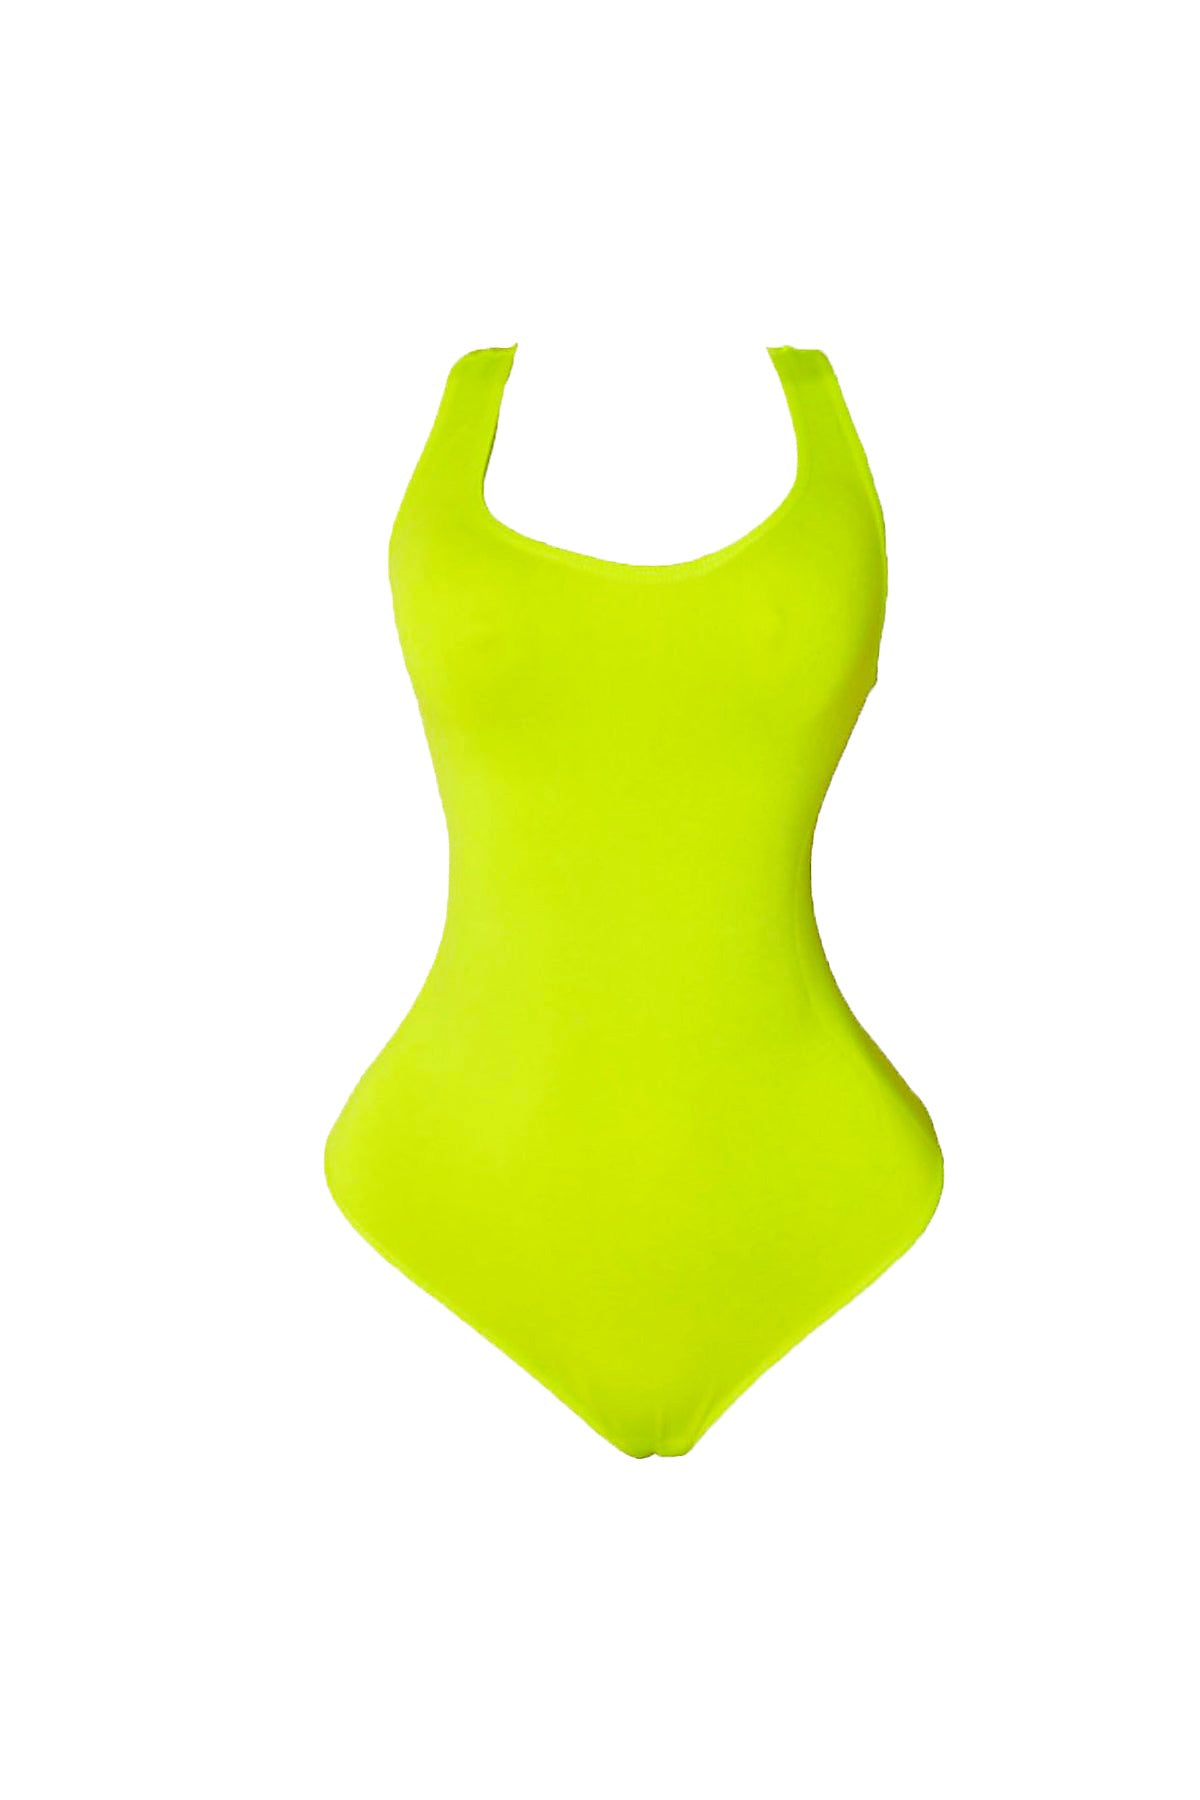 Neon Lime Stretch Crepe One Shoulder Thong Bodysuit